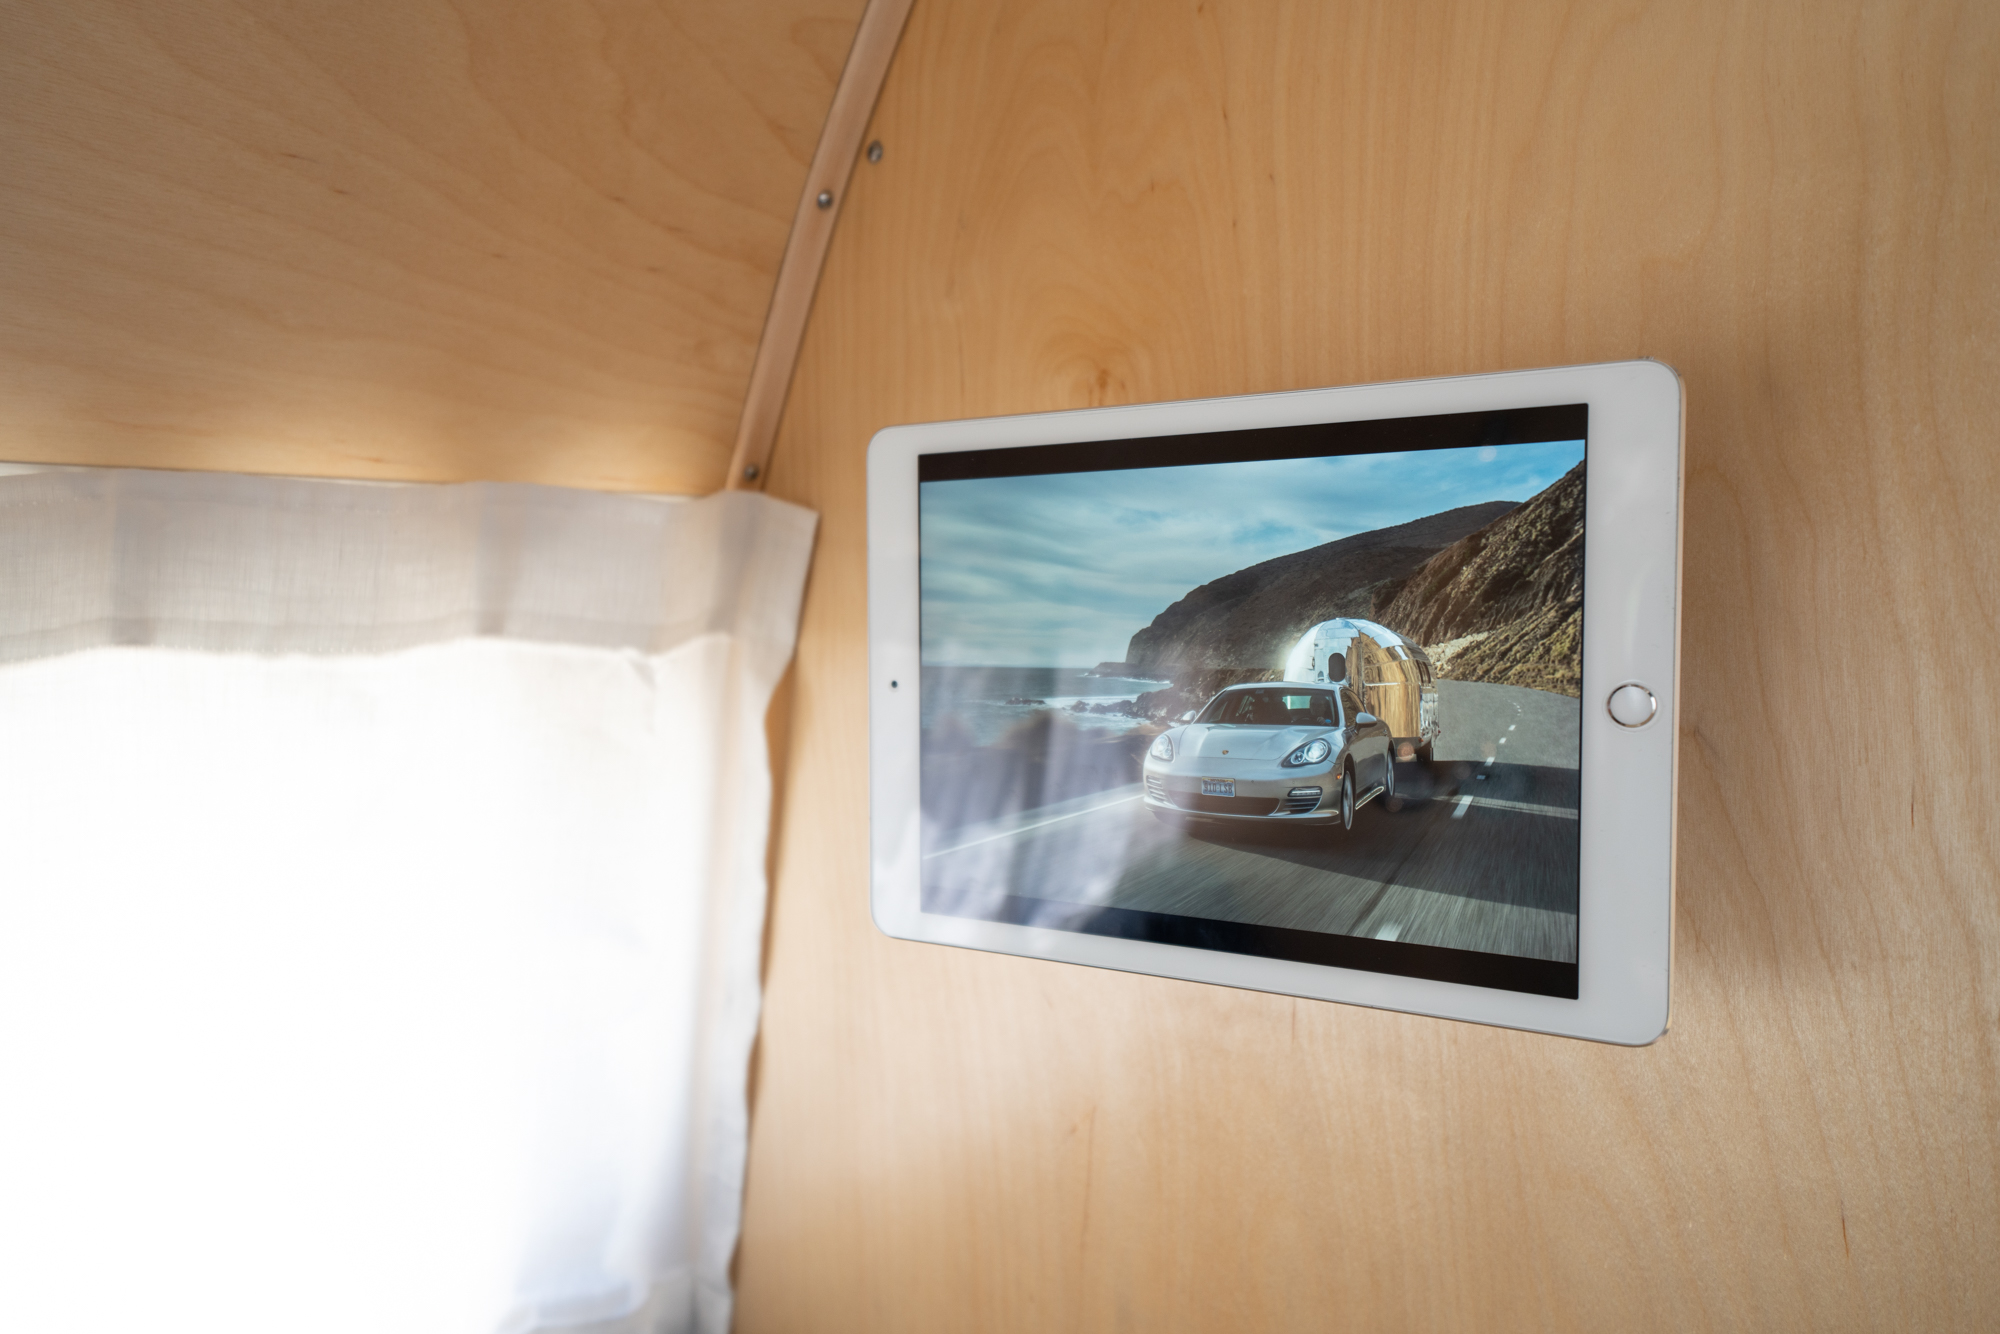 Feature Highlight: Tablets & Streaming In Your Bowlus®